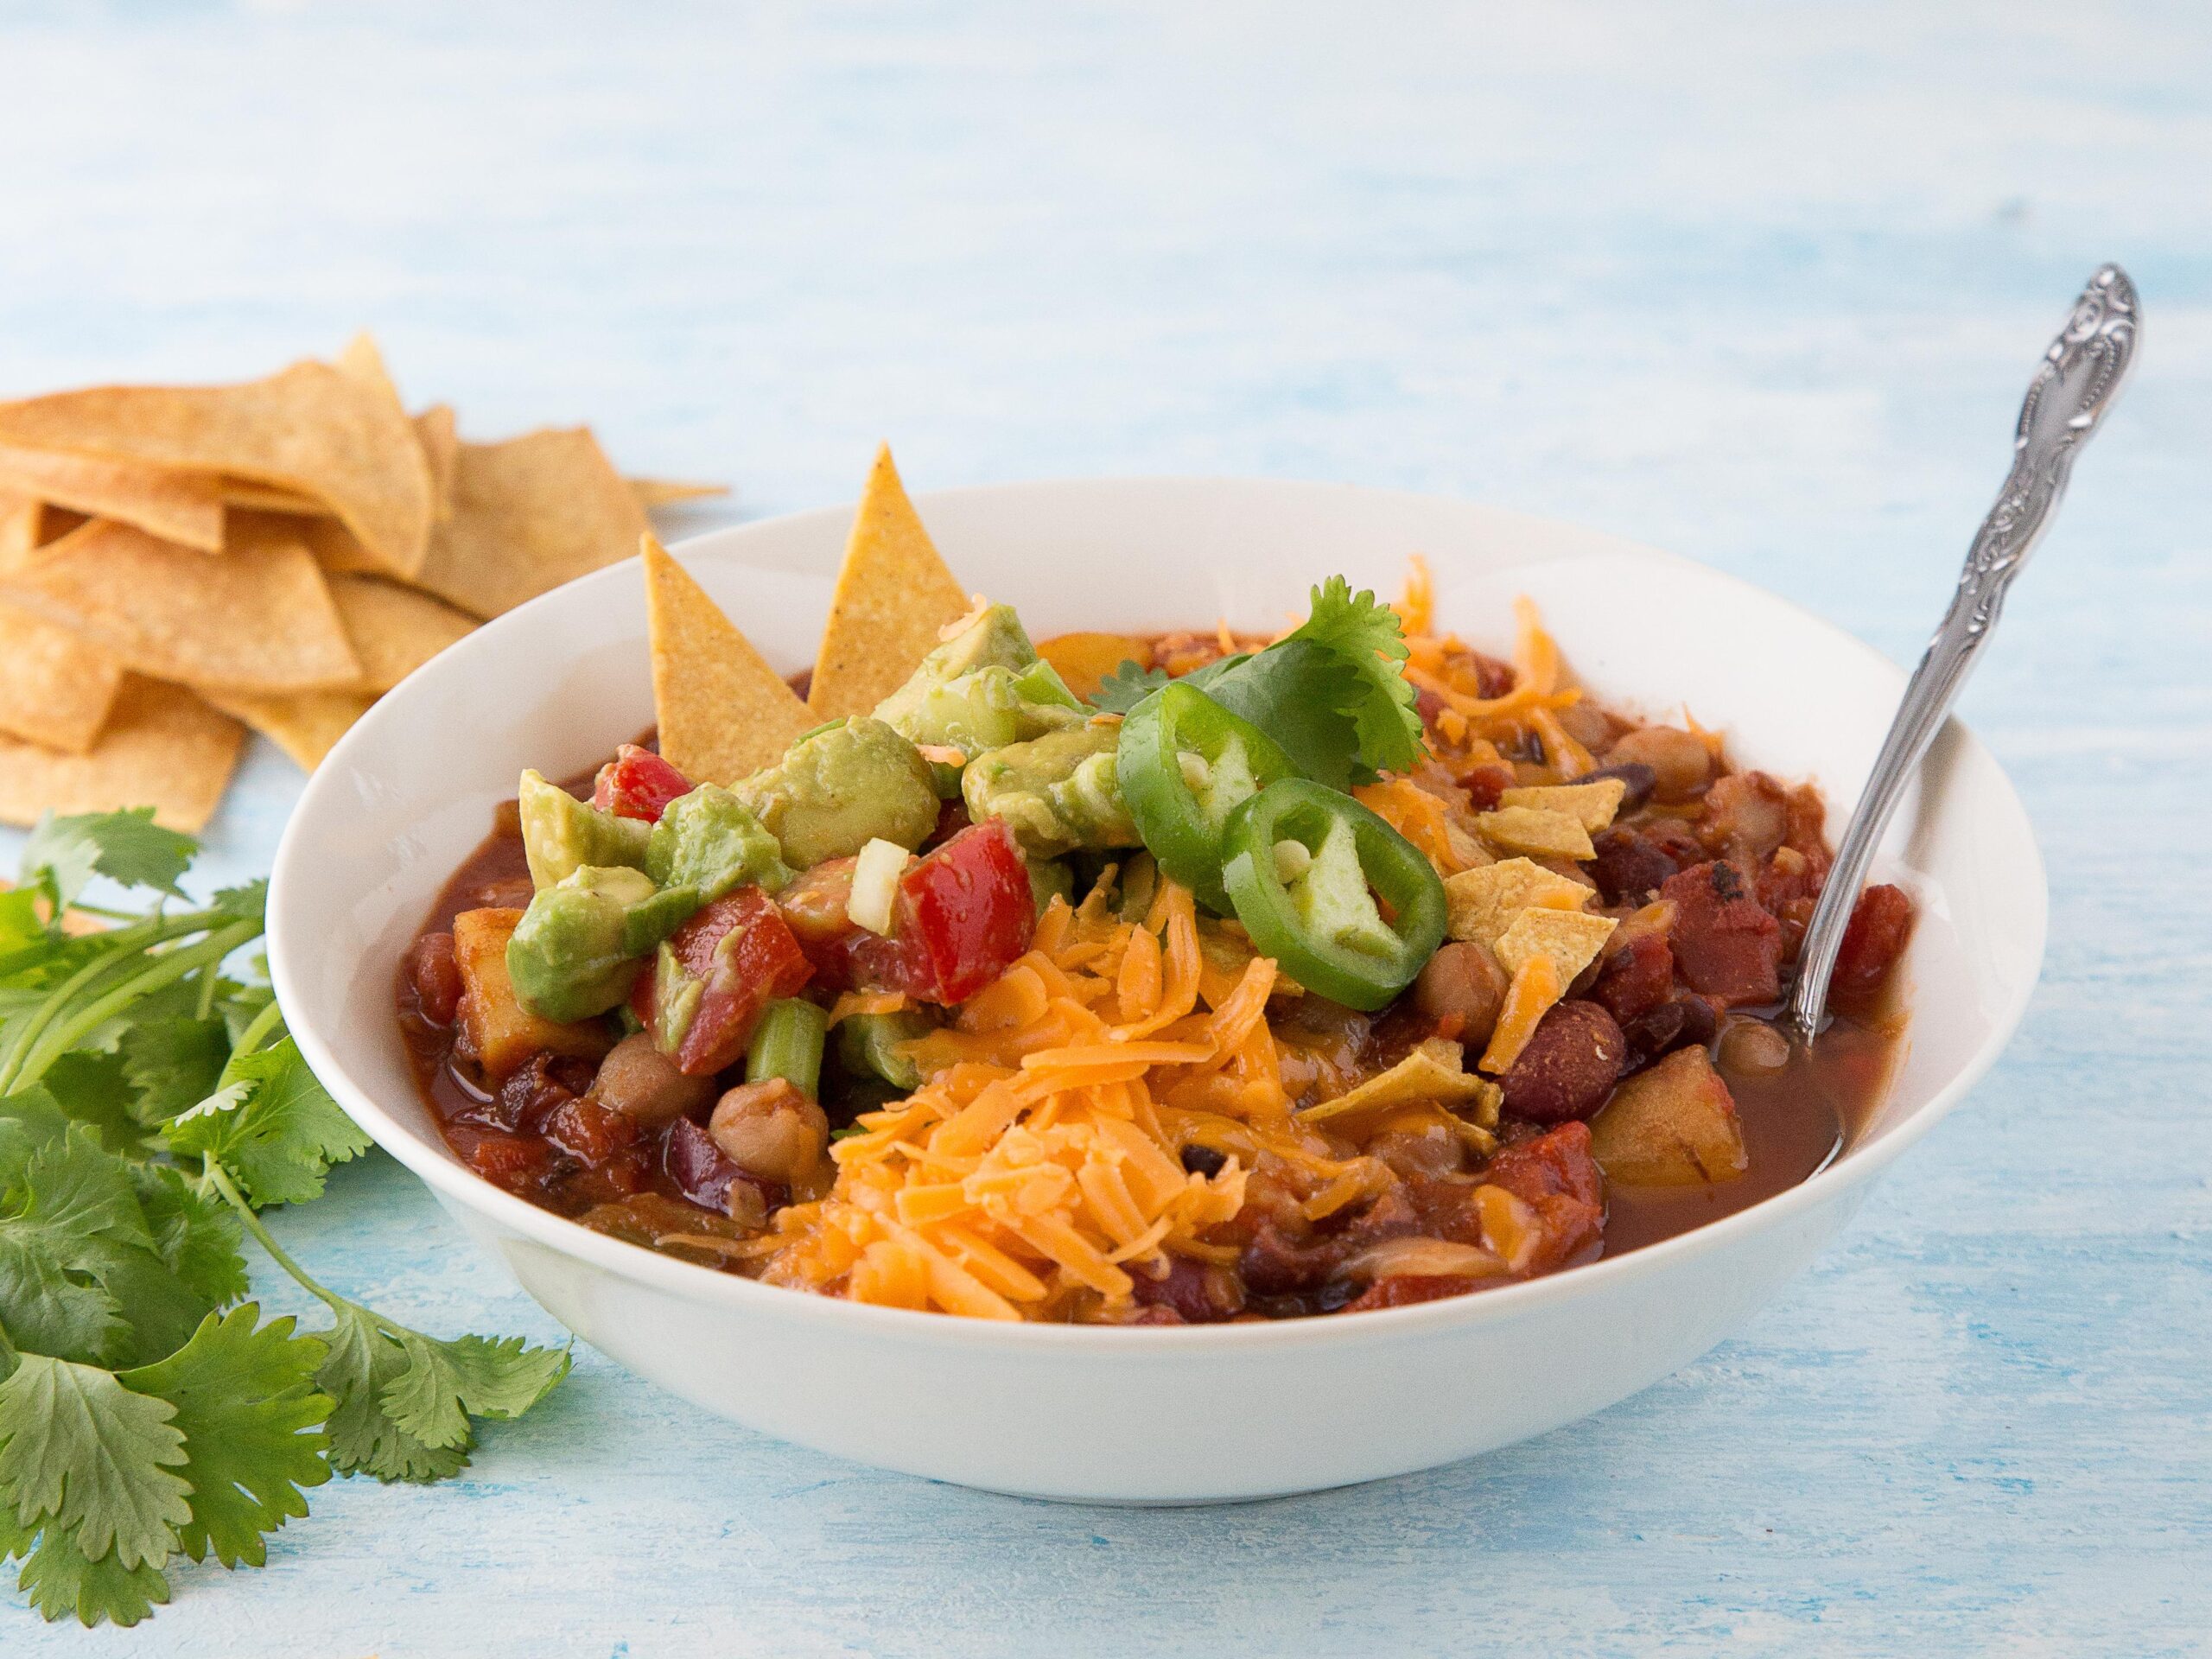  Nothing beats a warm bowl of chili on a cool day - this recipe is the perfect comfort food.